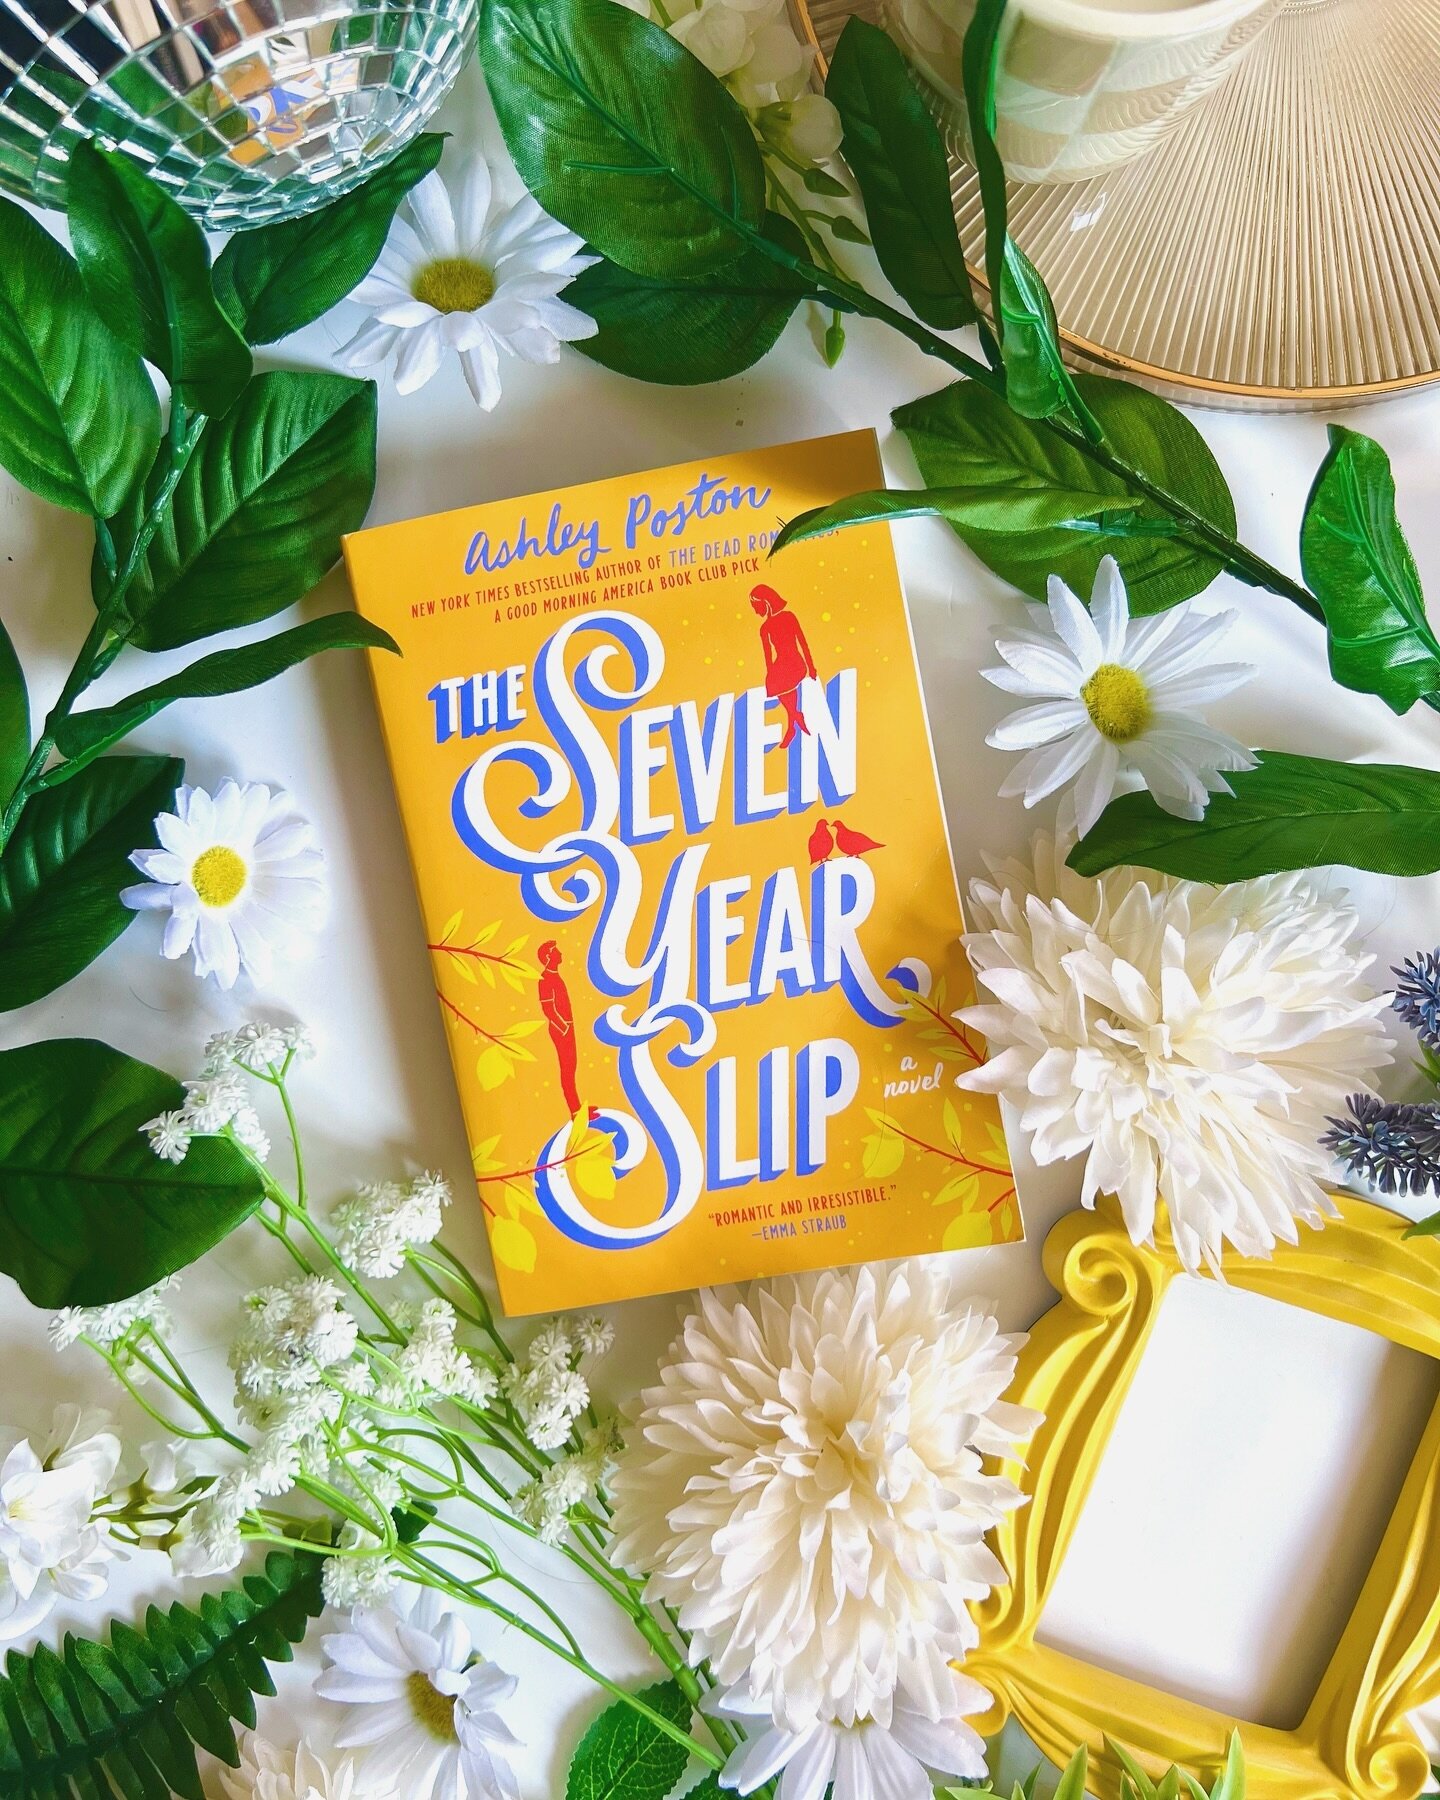 All I can say for this book is WOW. I loved everything about it. I was completely enthralled by this story, and read it in one sitting before I even knew it!!

I absolutely adore stories like this, give me all the fluffy romance, rom-com vibes PLS. I